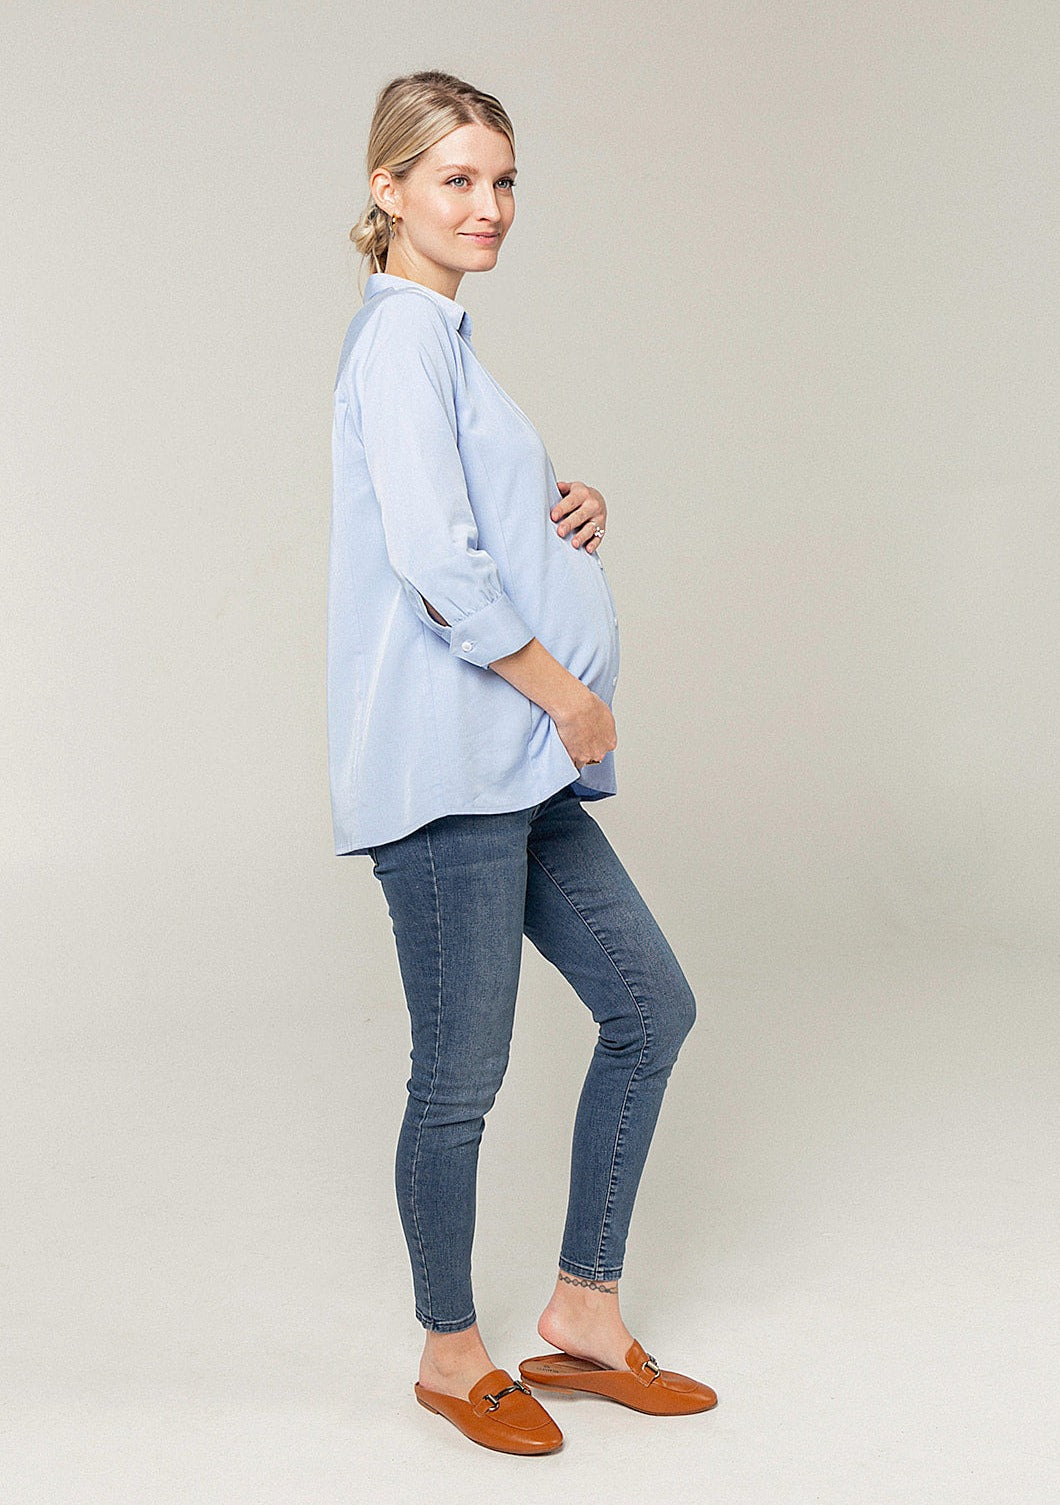 TENCEL Maternity Button Down Dress Shirt, 3/4 sleeves, no-peek buttons. Petite and standard sizes, comes in white or pale blue.